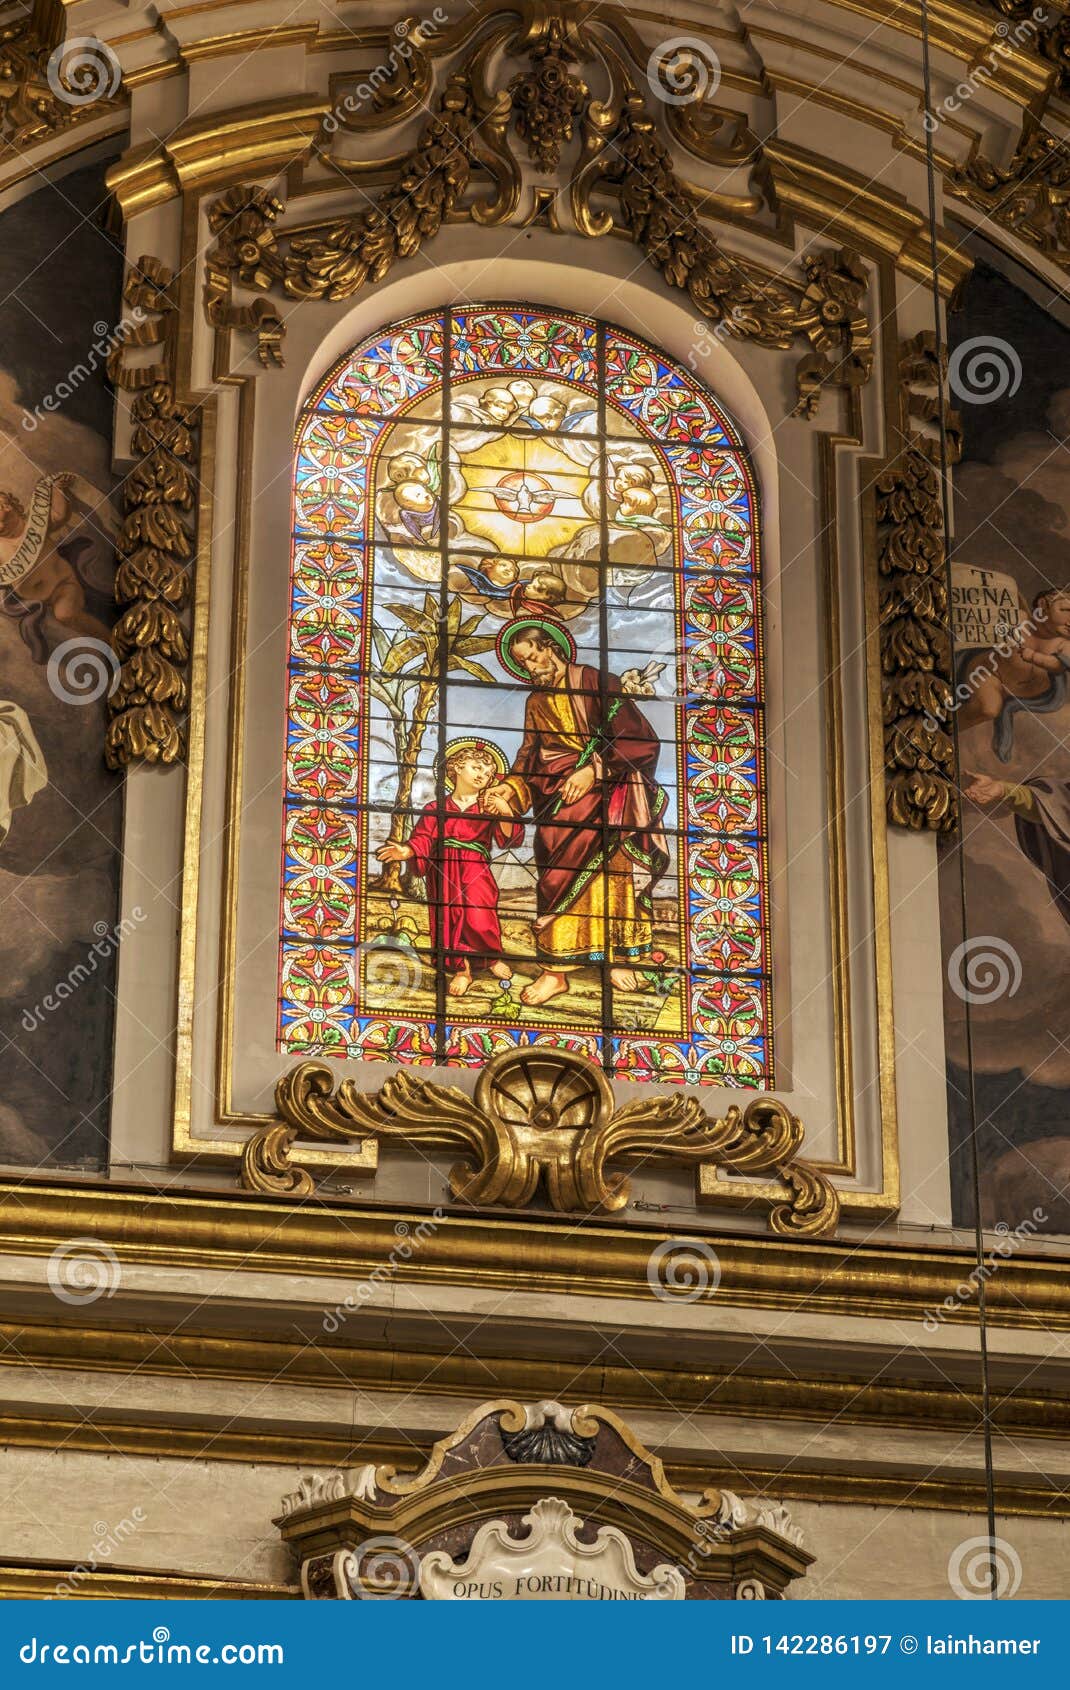 Stained Glass Window Above The Main Altar Floor In St Paul S Cathedral Mdina Malta Editorial Photography Image Of Pauls Antiquity